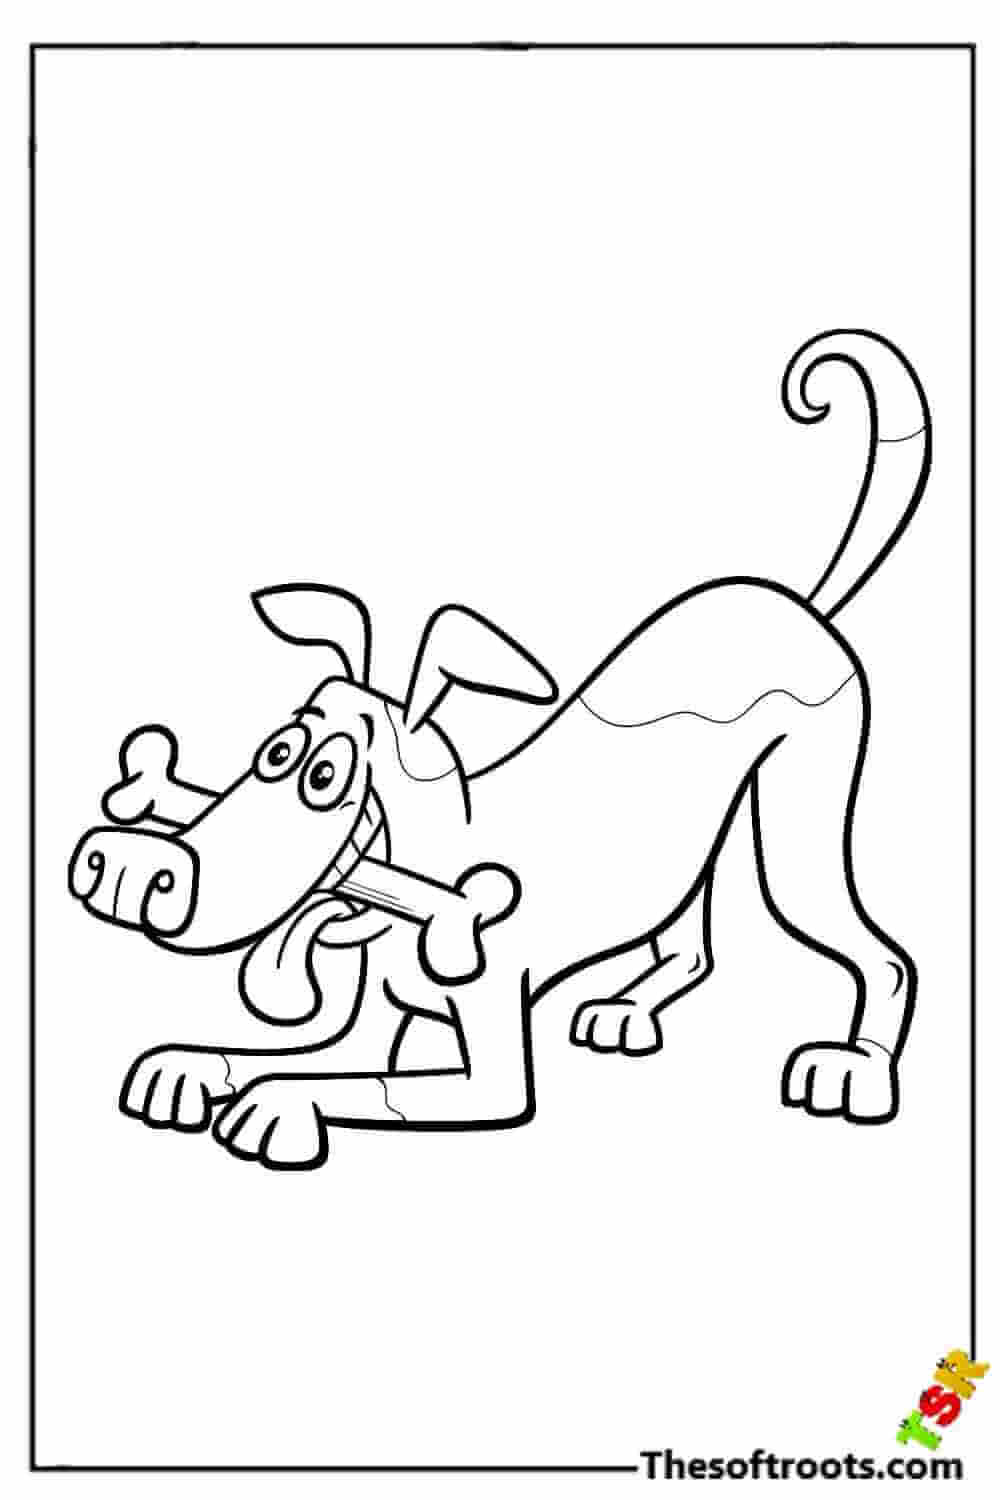 Playful puppy coloring pages